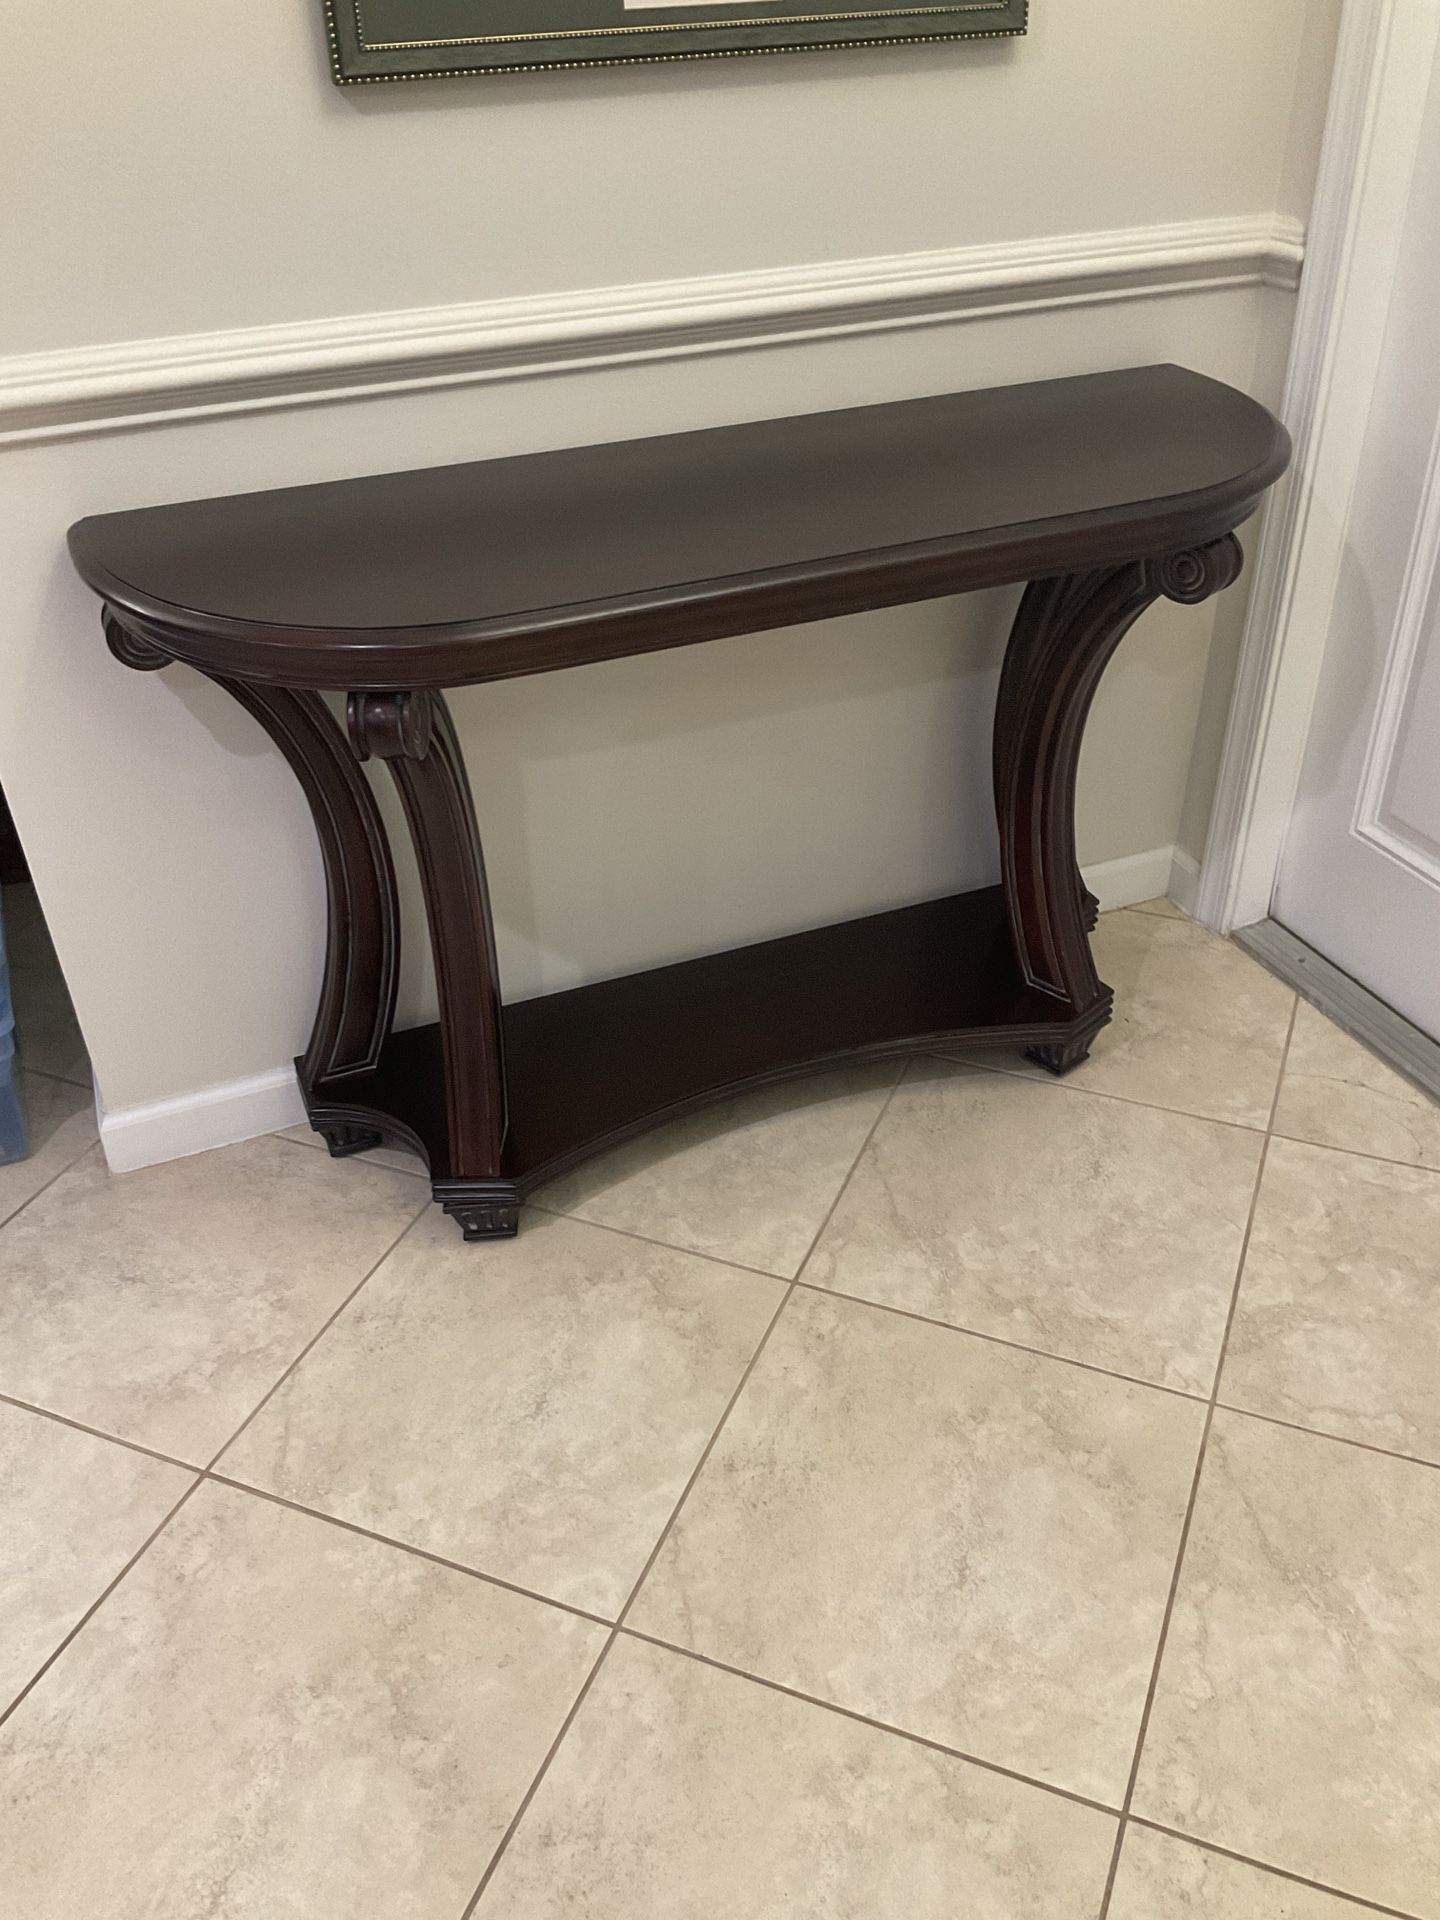 Entry Way Table